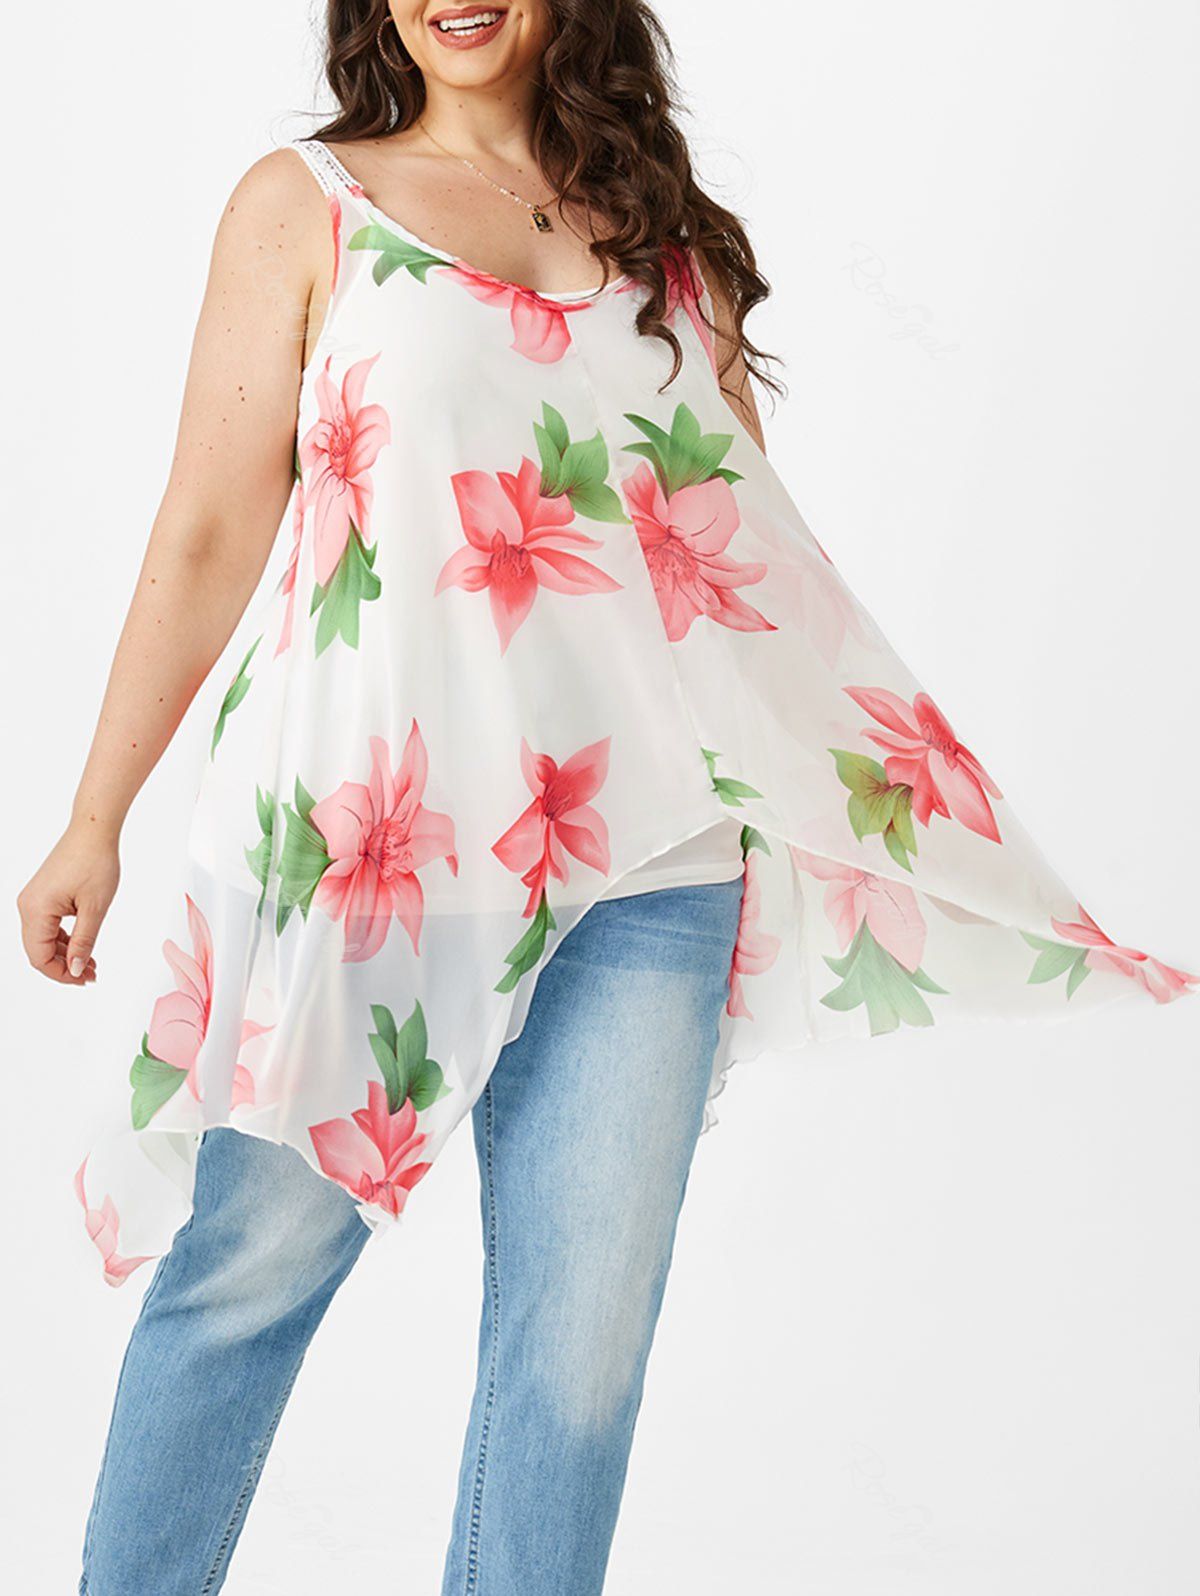 Shop Plus Size Camisole and Floral Handkerchief Tank Top  